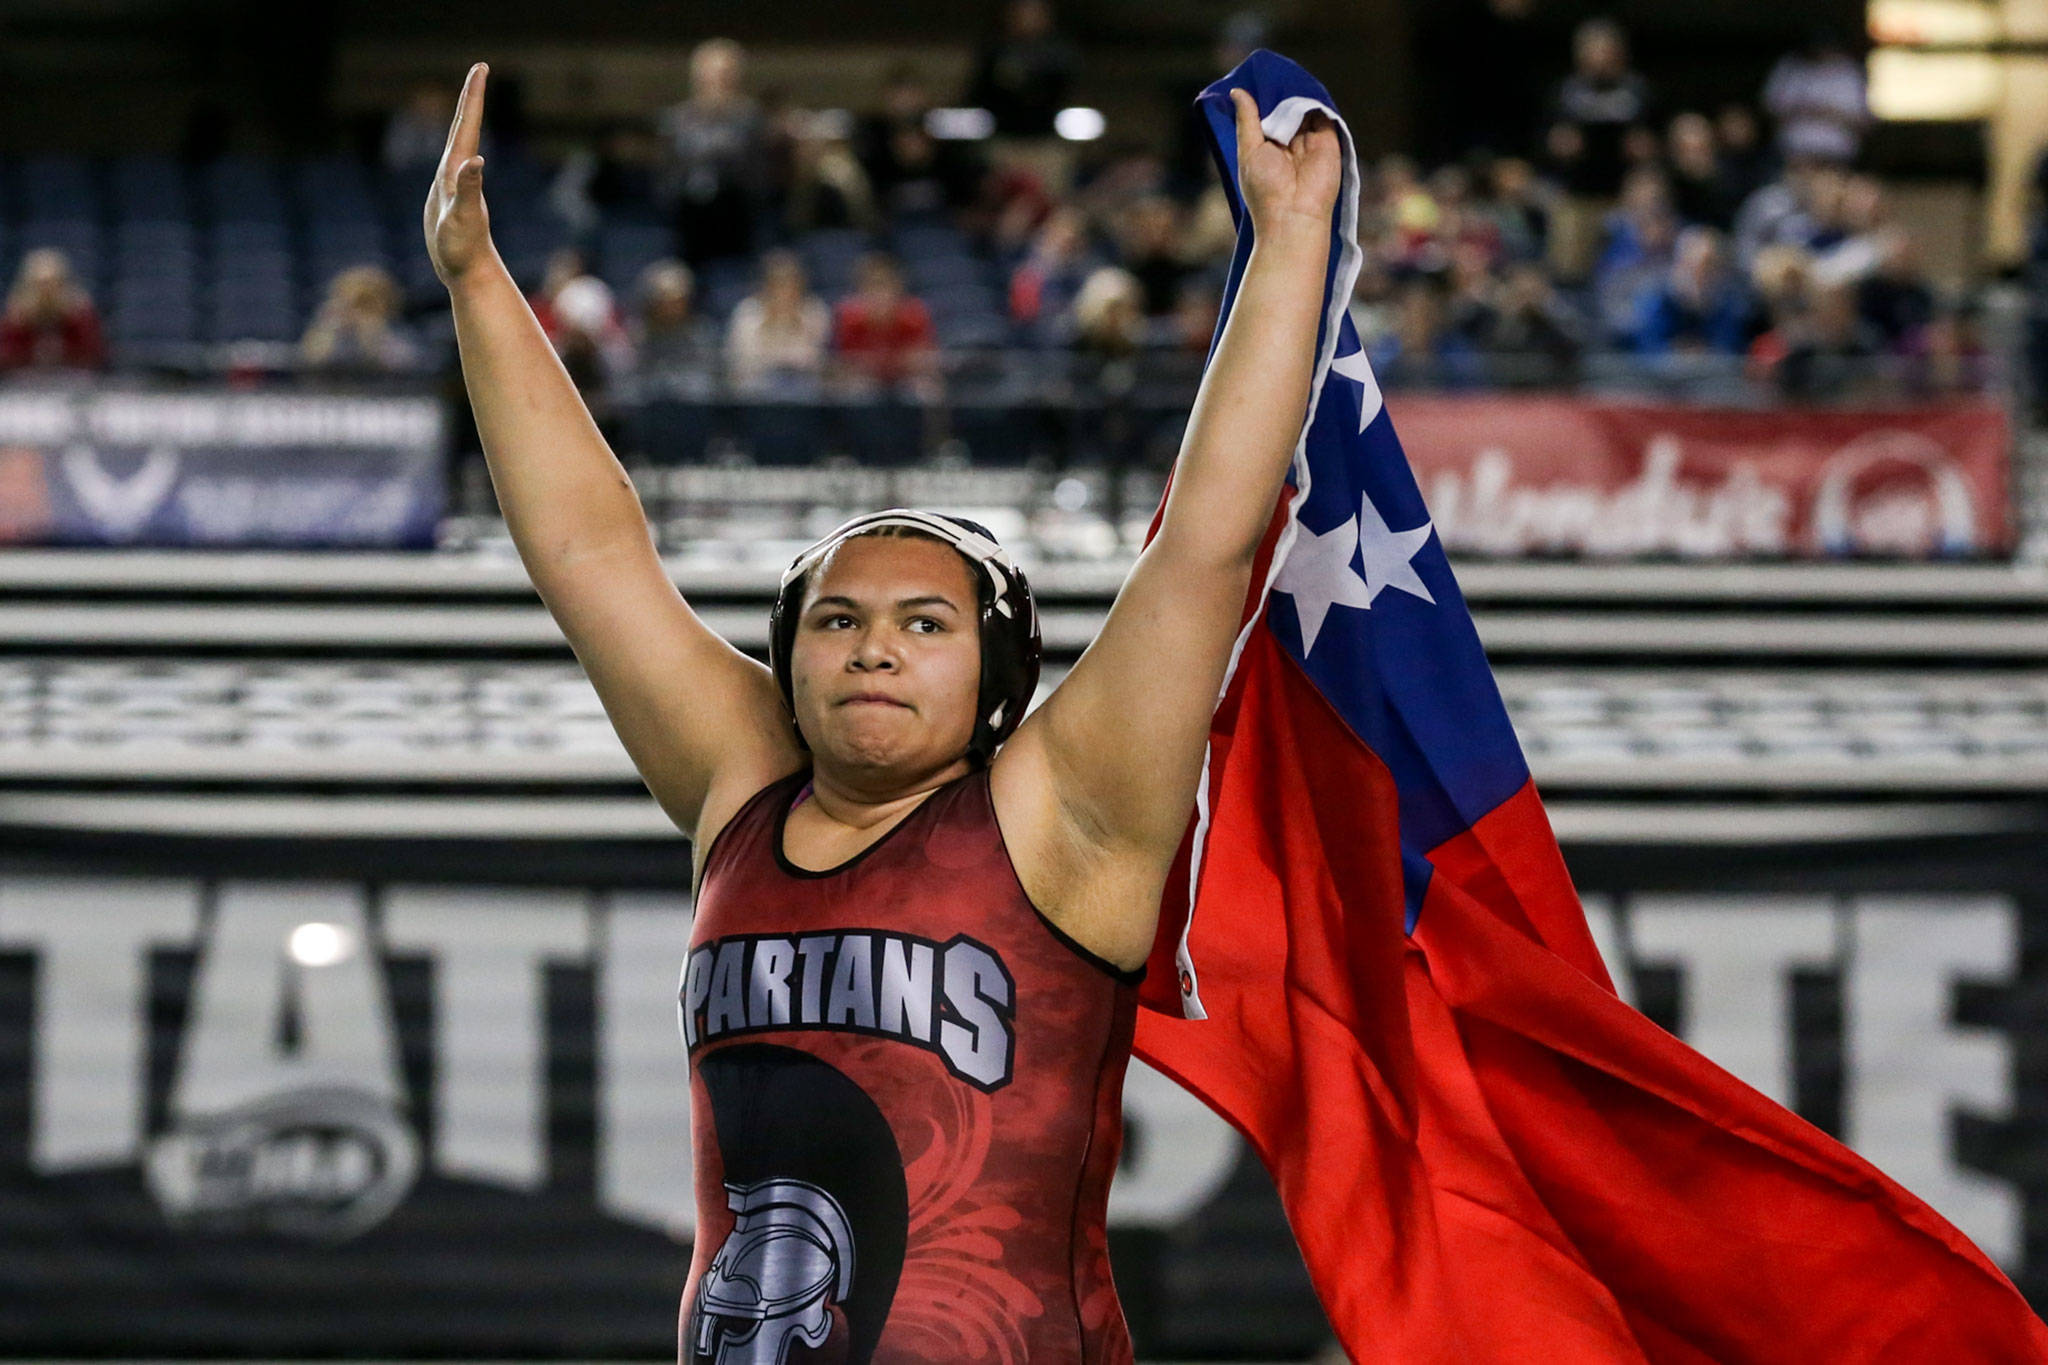 Stanwoods Chanel Siva celebrates with the Samoan flag after winning a state championship in the girls 235-pound weight class at Mat Classic XXXI on Feb. 15 in Tacoma. Siva is the areas only returning state champion. (Kevin Clark / The Herald)